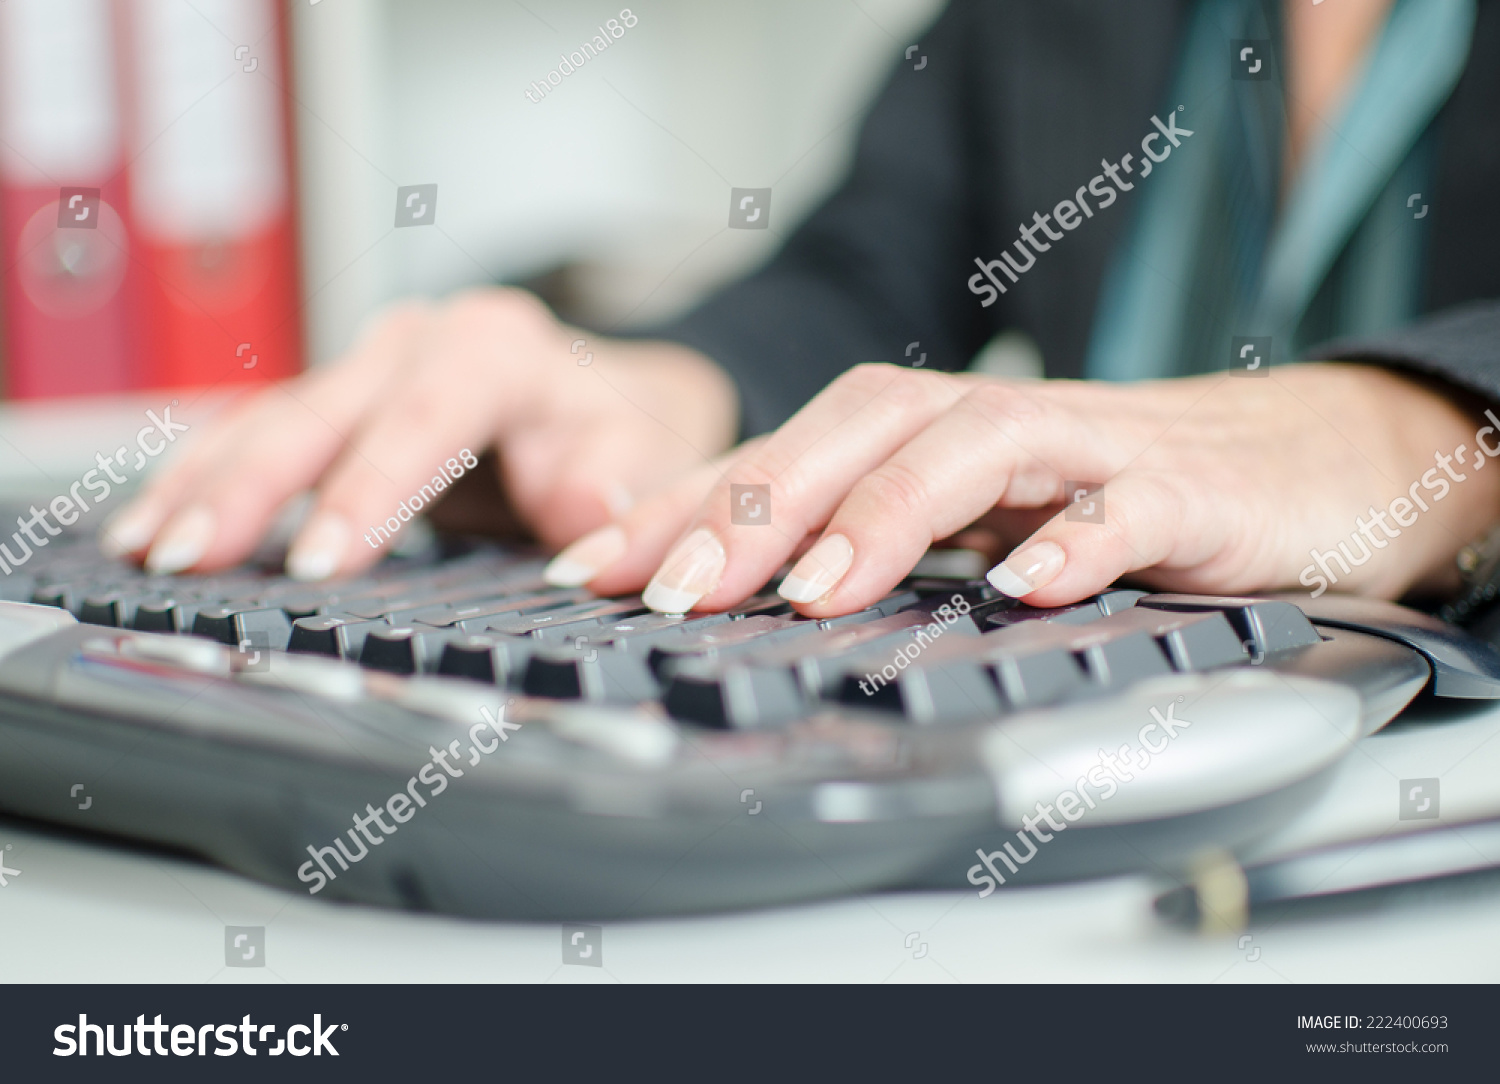 Woman's hands typing on a keyboard #222400693